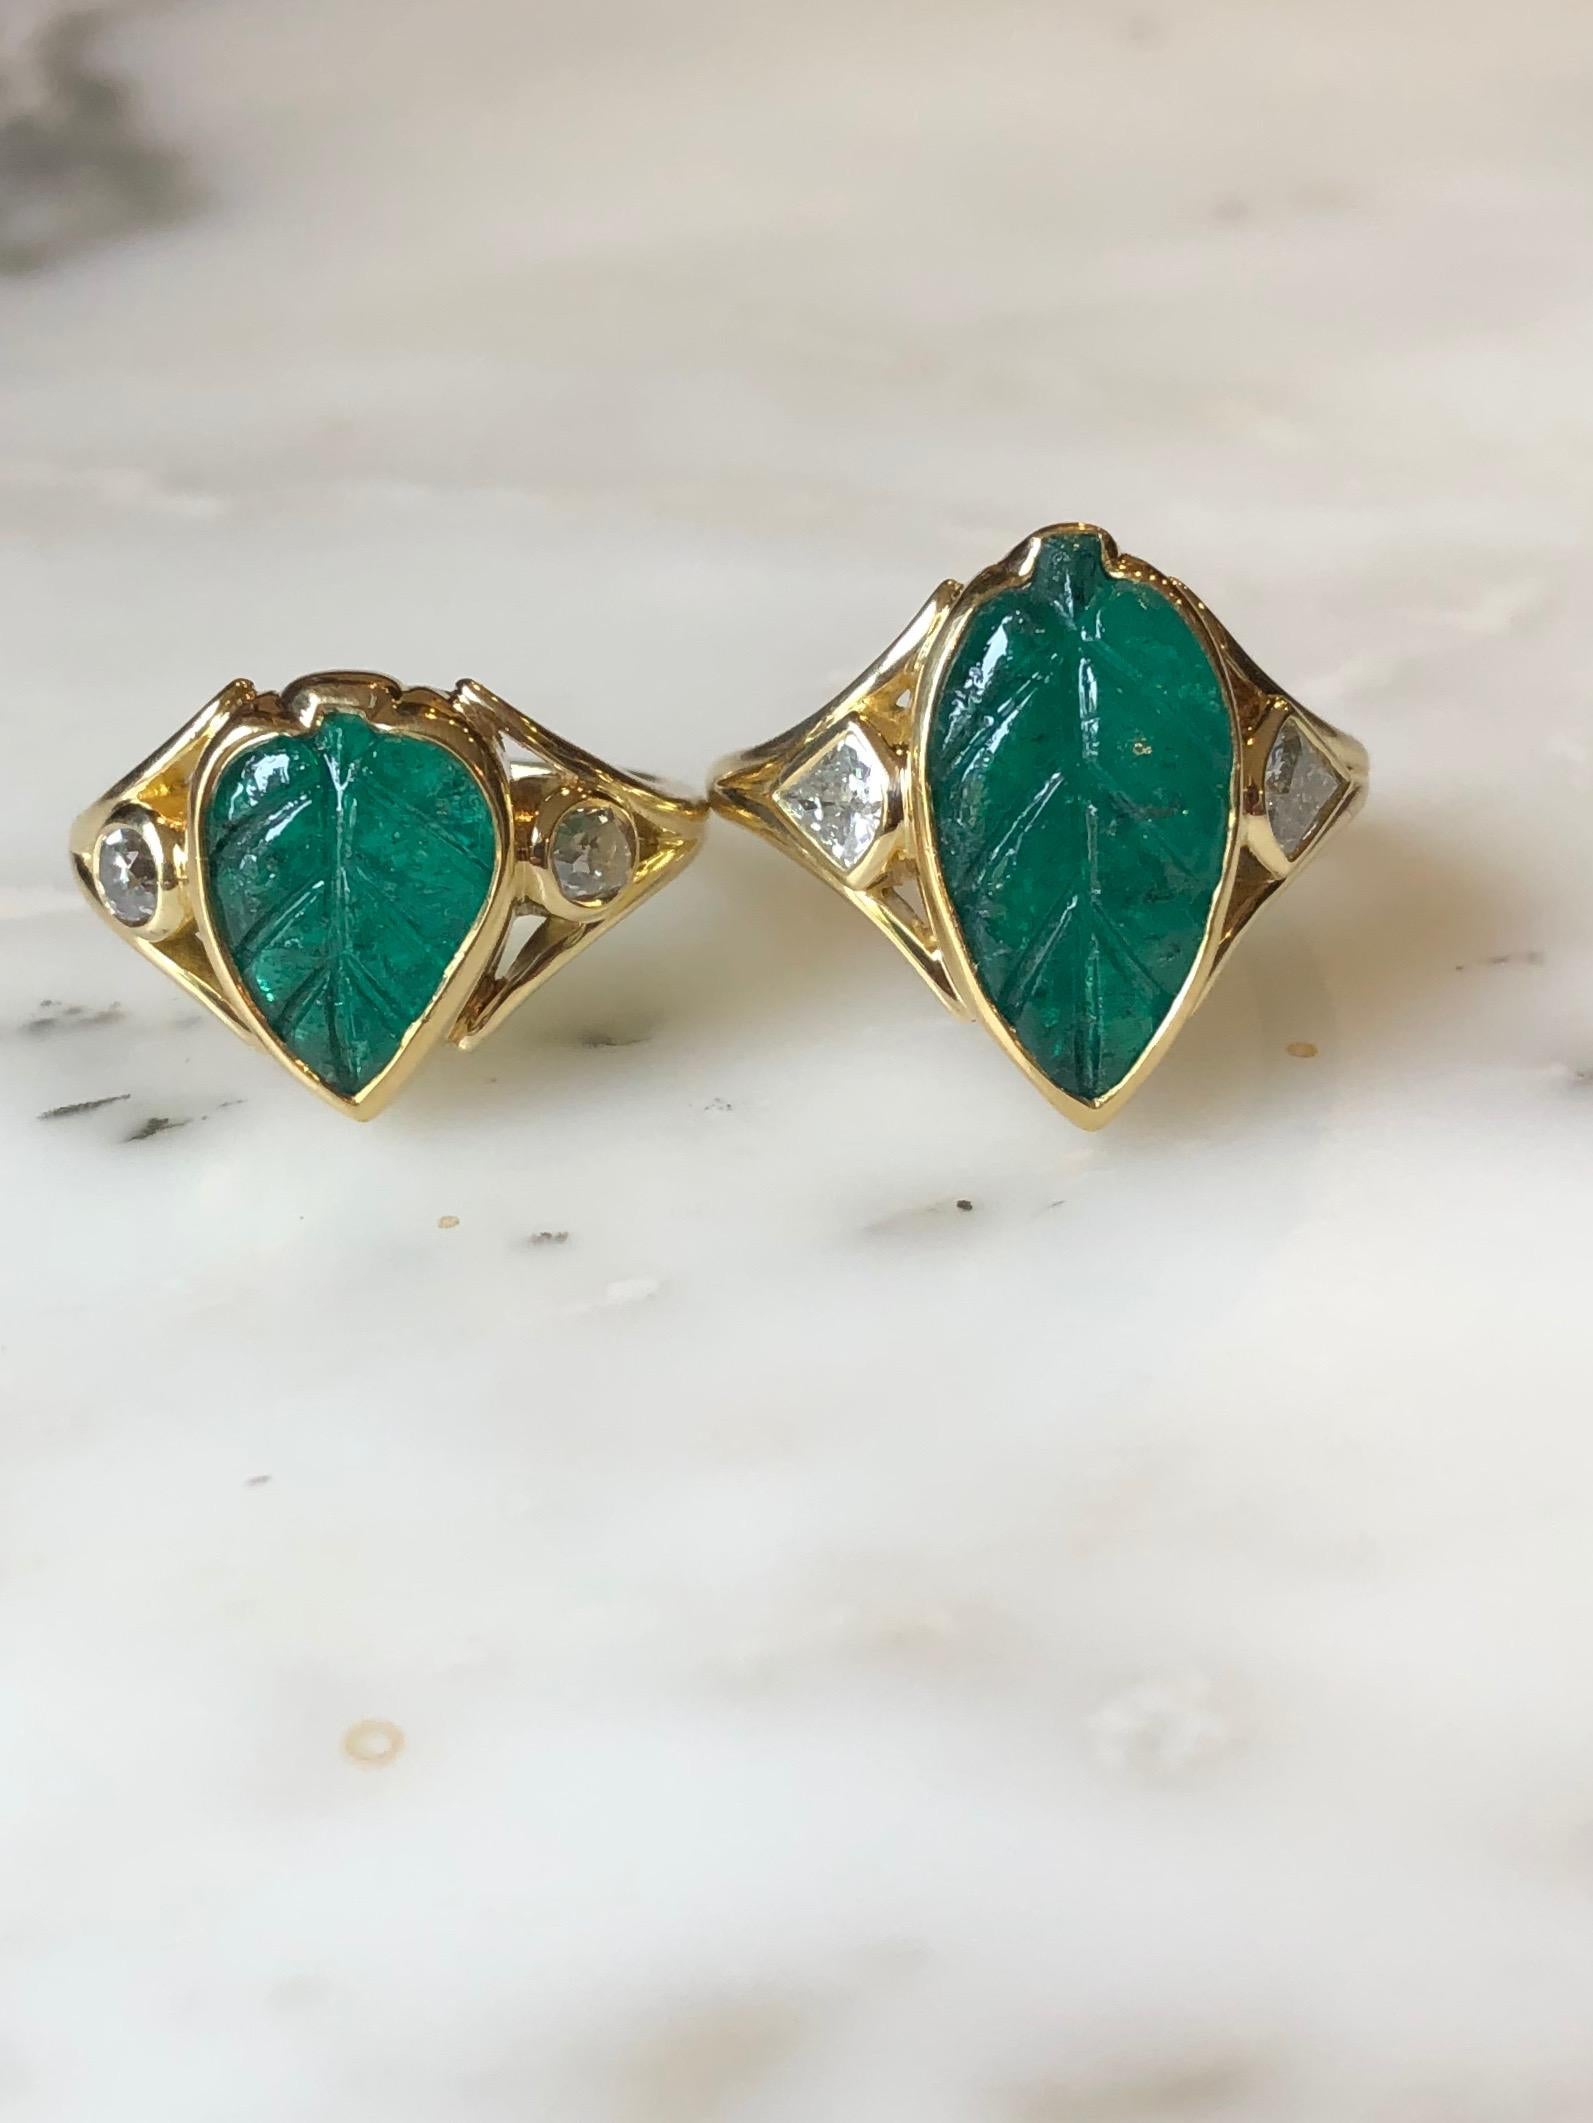 Hand carved Muzo Colombian emerald leaf ring with antique VS+ diamonds flanking. This emerald was sourced directly from Colombia through our collaboration with IEEX Emeralds. This ring is made by hand using ancient gold-smithing techniques in